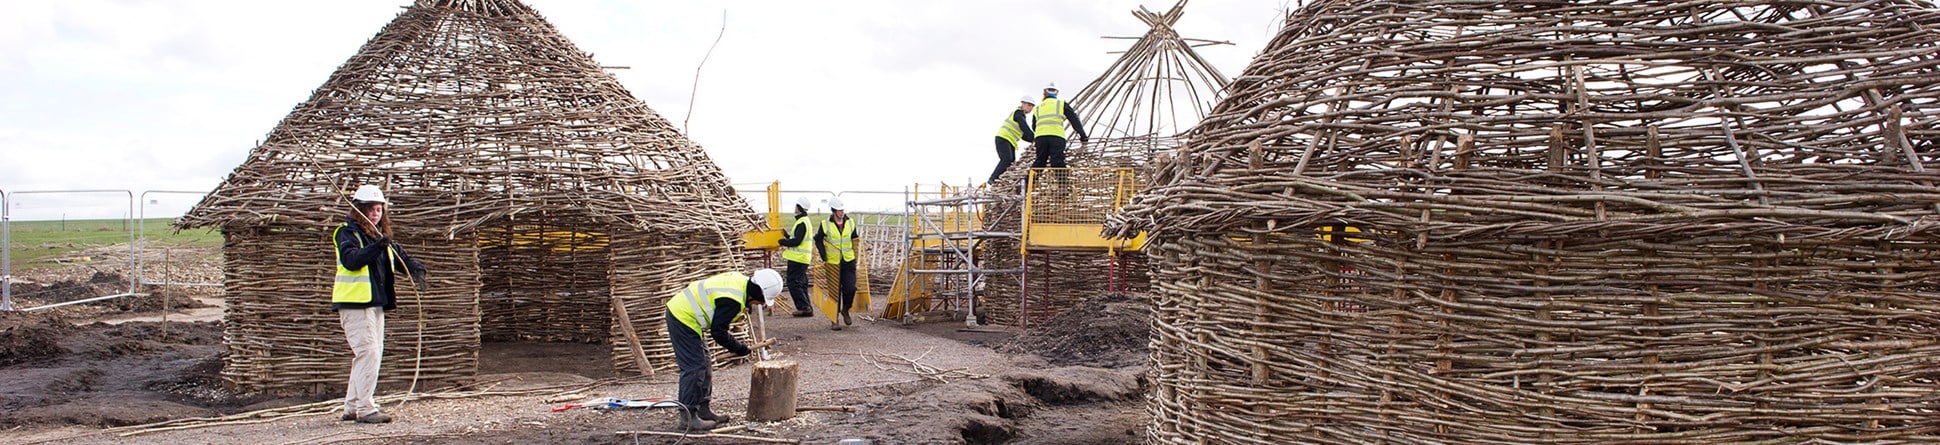 Ground-level image of 6 people in high-visibility clothing and protective helmets building Neolithic-style huts.